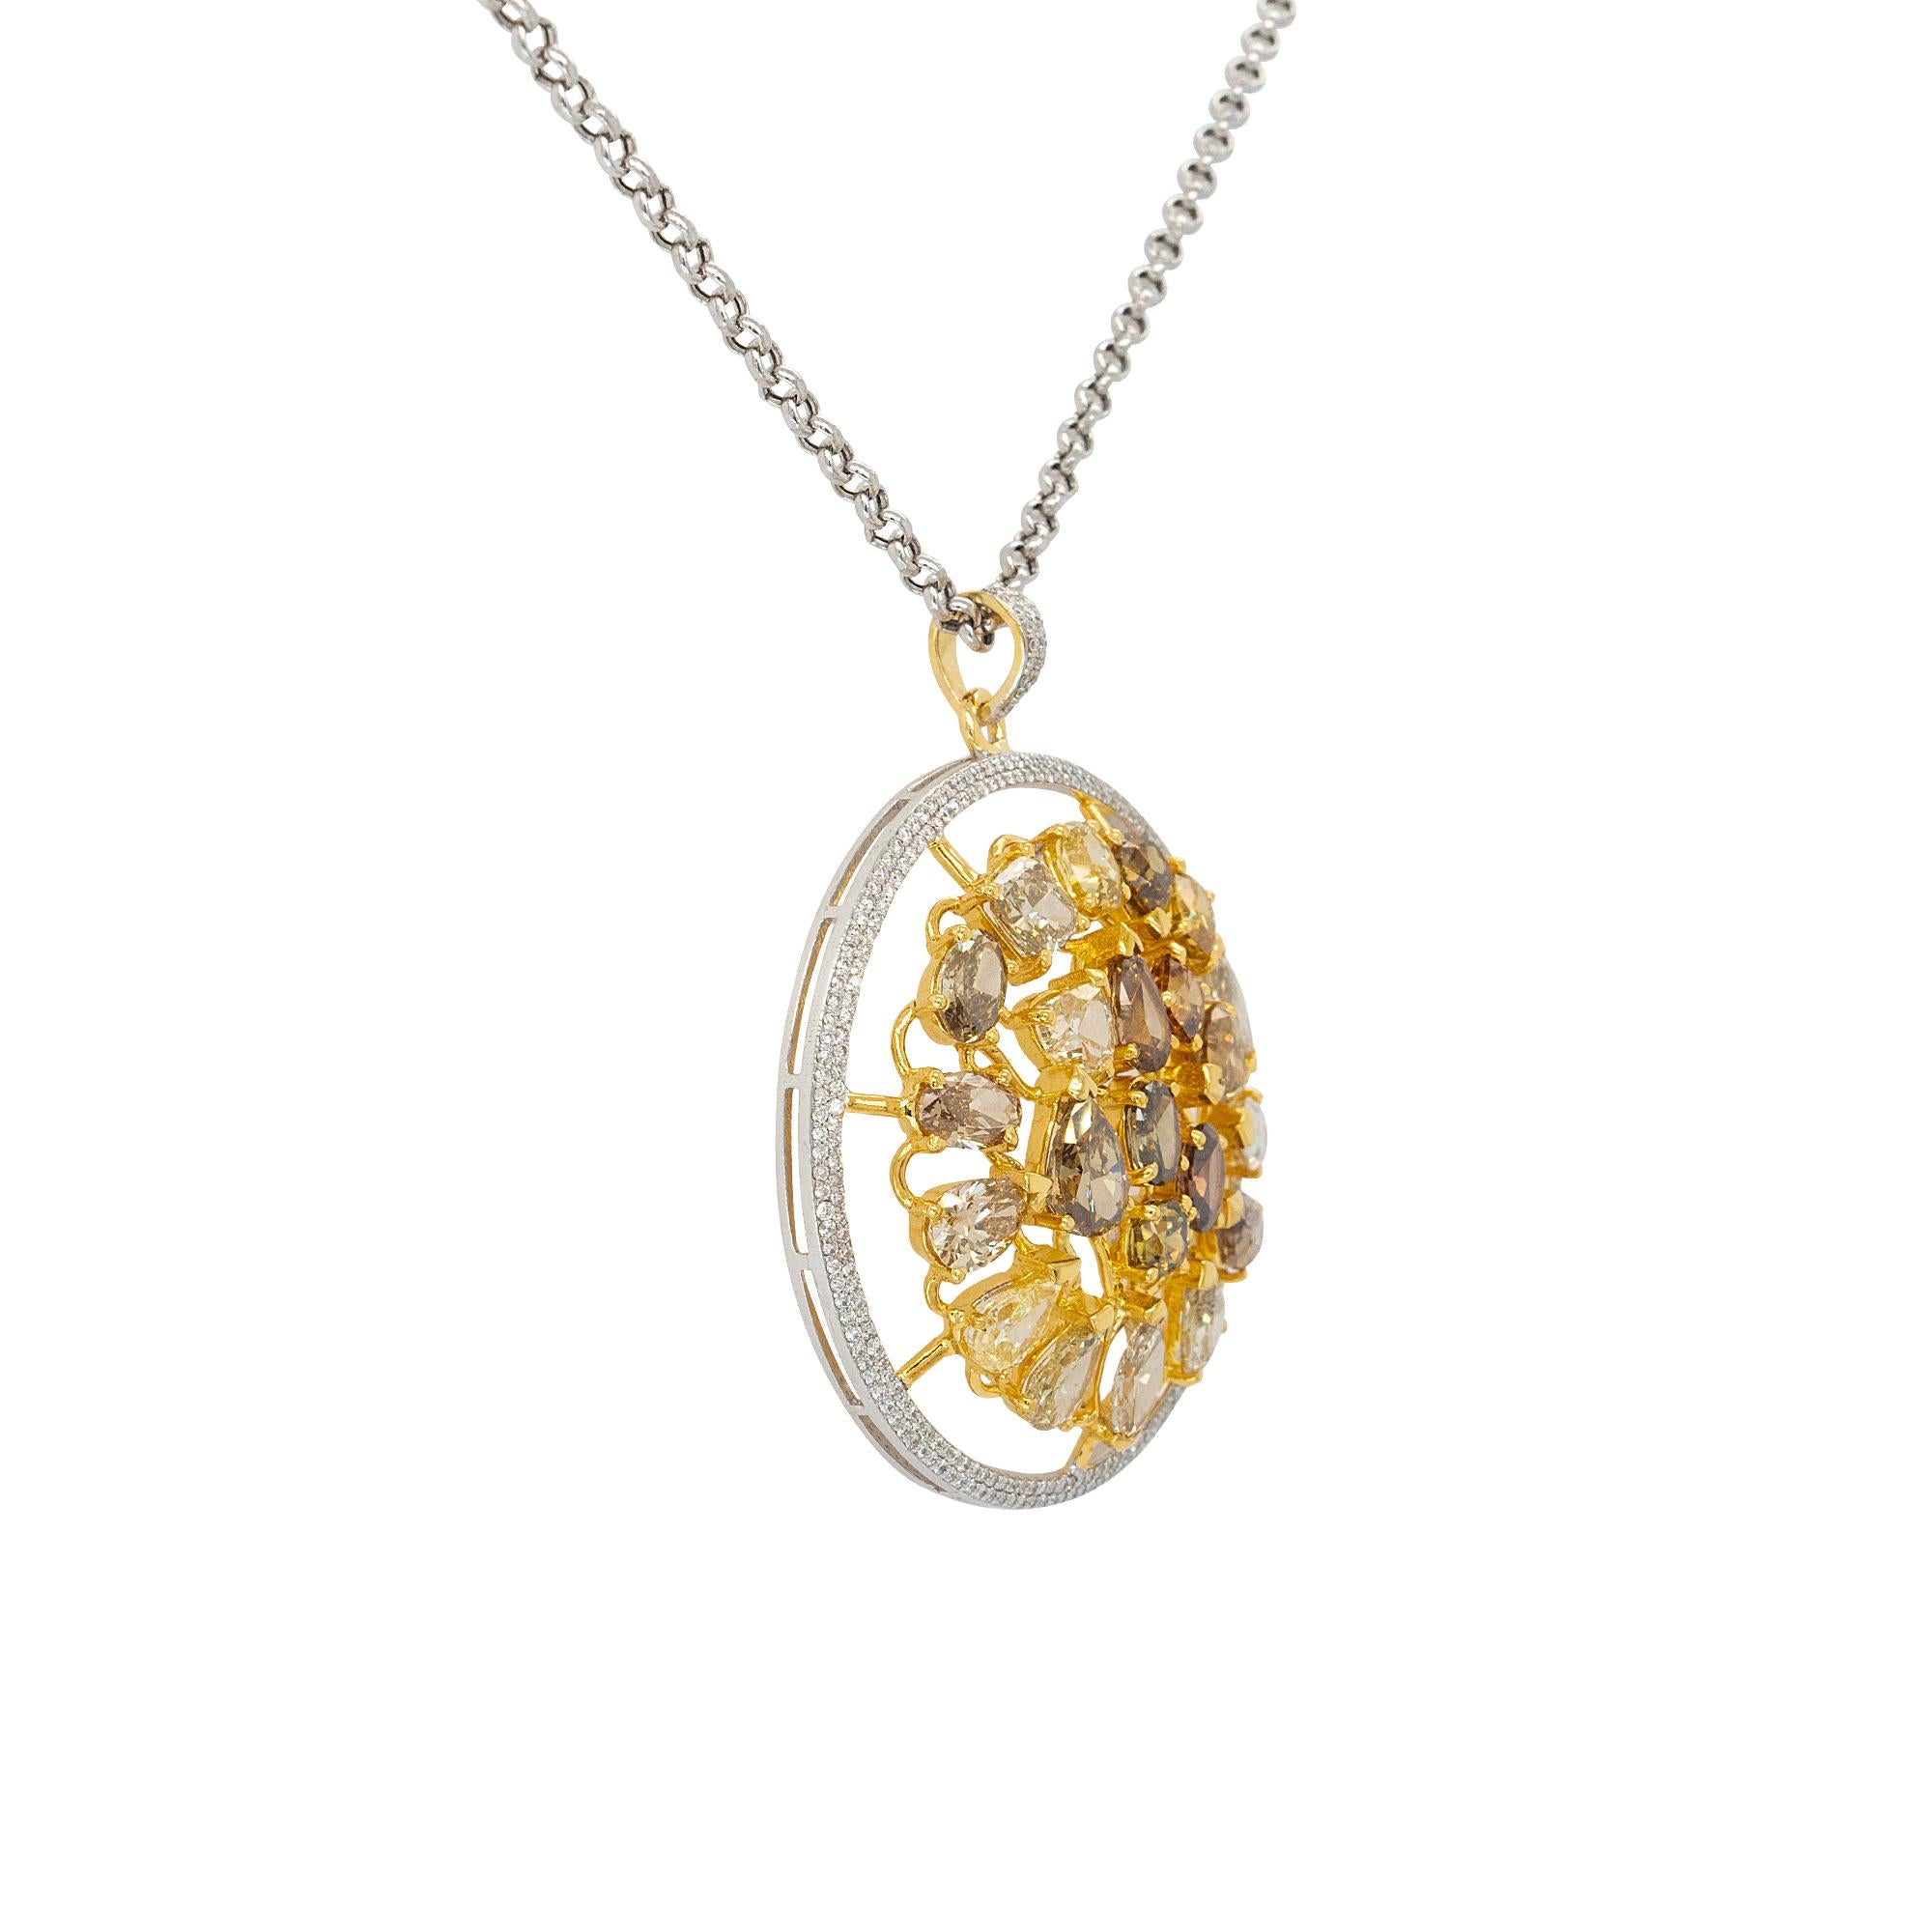 Pendant Details:
14kt yellow gold large round mixed shapes and color natural diamond
Apdiatw= 1.60cts
ApColor diatw= 9.20cts
Approx diamond clarity= SI
Approx diamond color= H-I
37.72mm x 9.71mm x 45.01mm
Chain Details: 14 White Gold Rolo